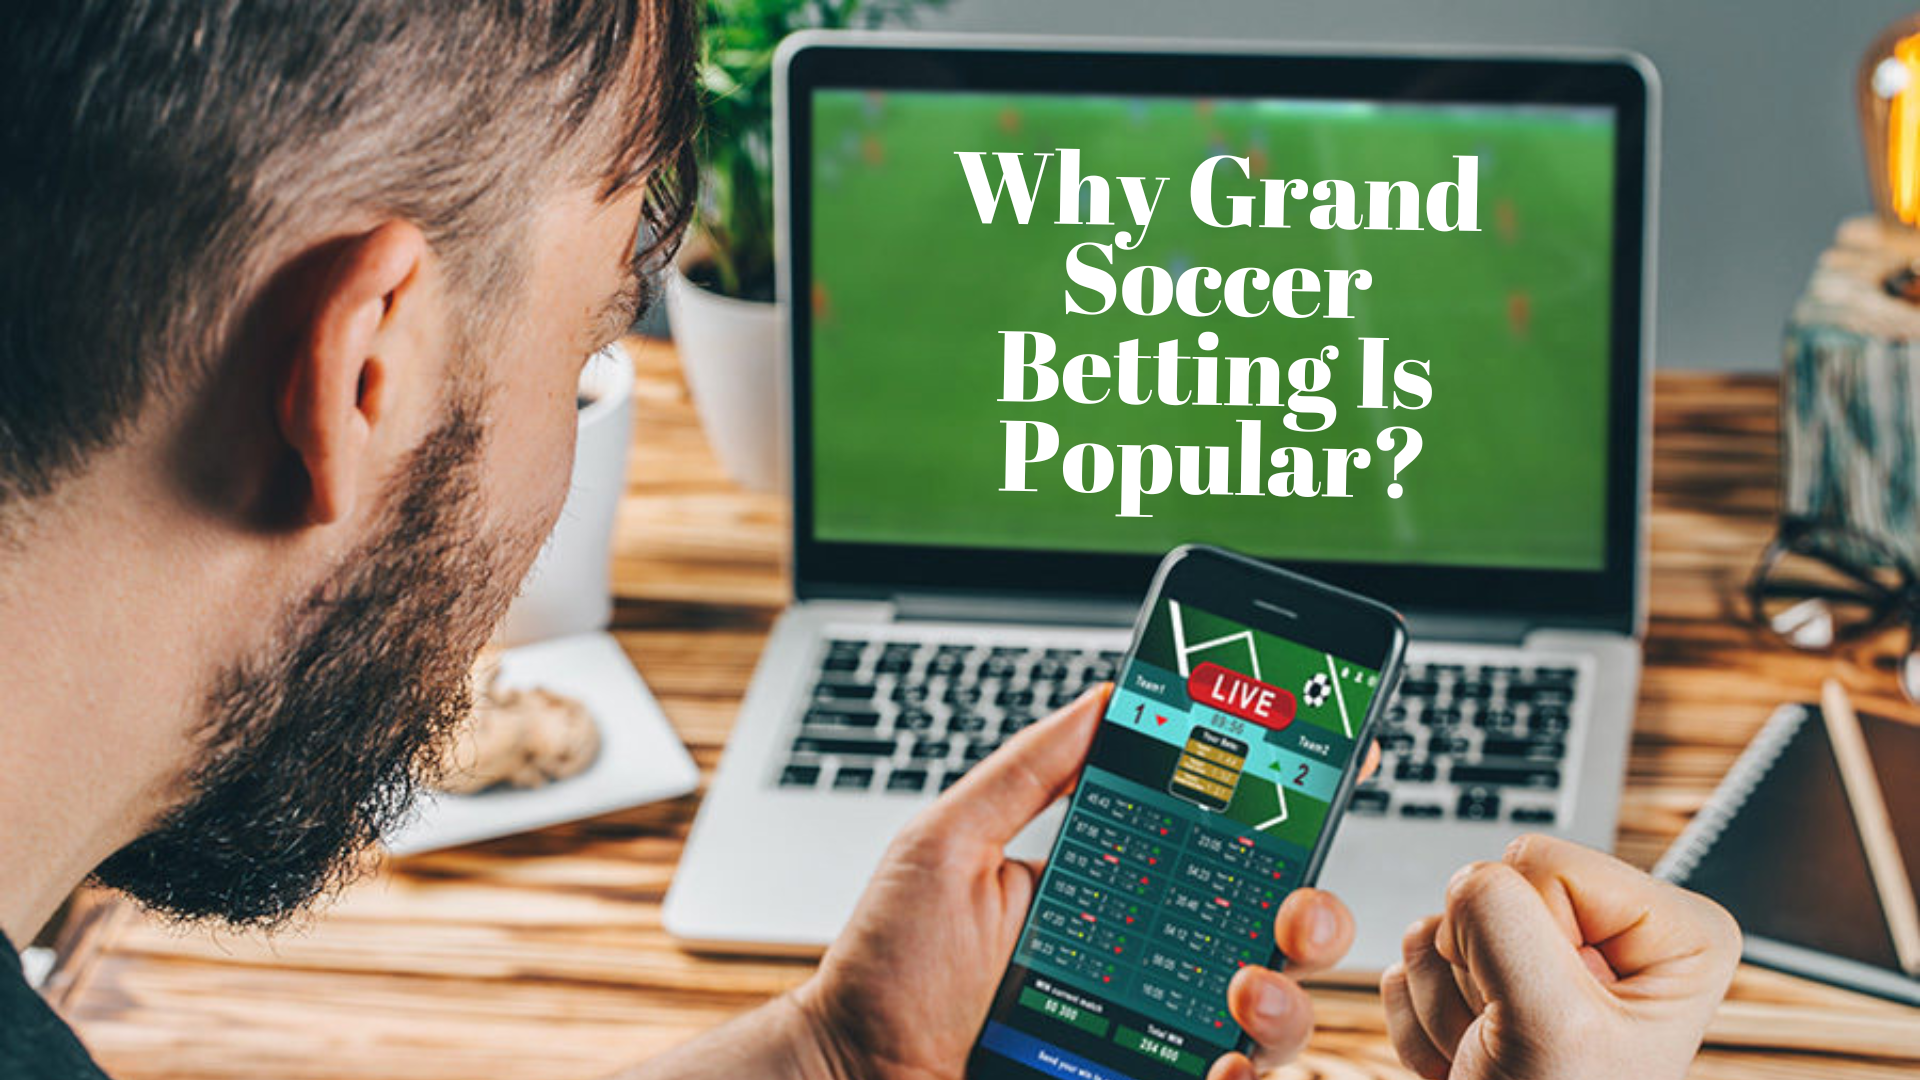 A man holding a phone while in front of the laptop with words Why Grand Soccer Betting Is Popular?